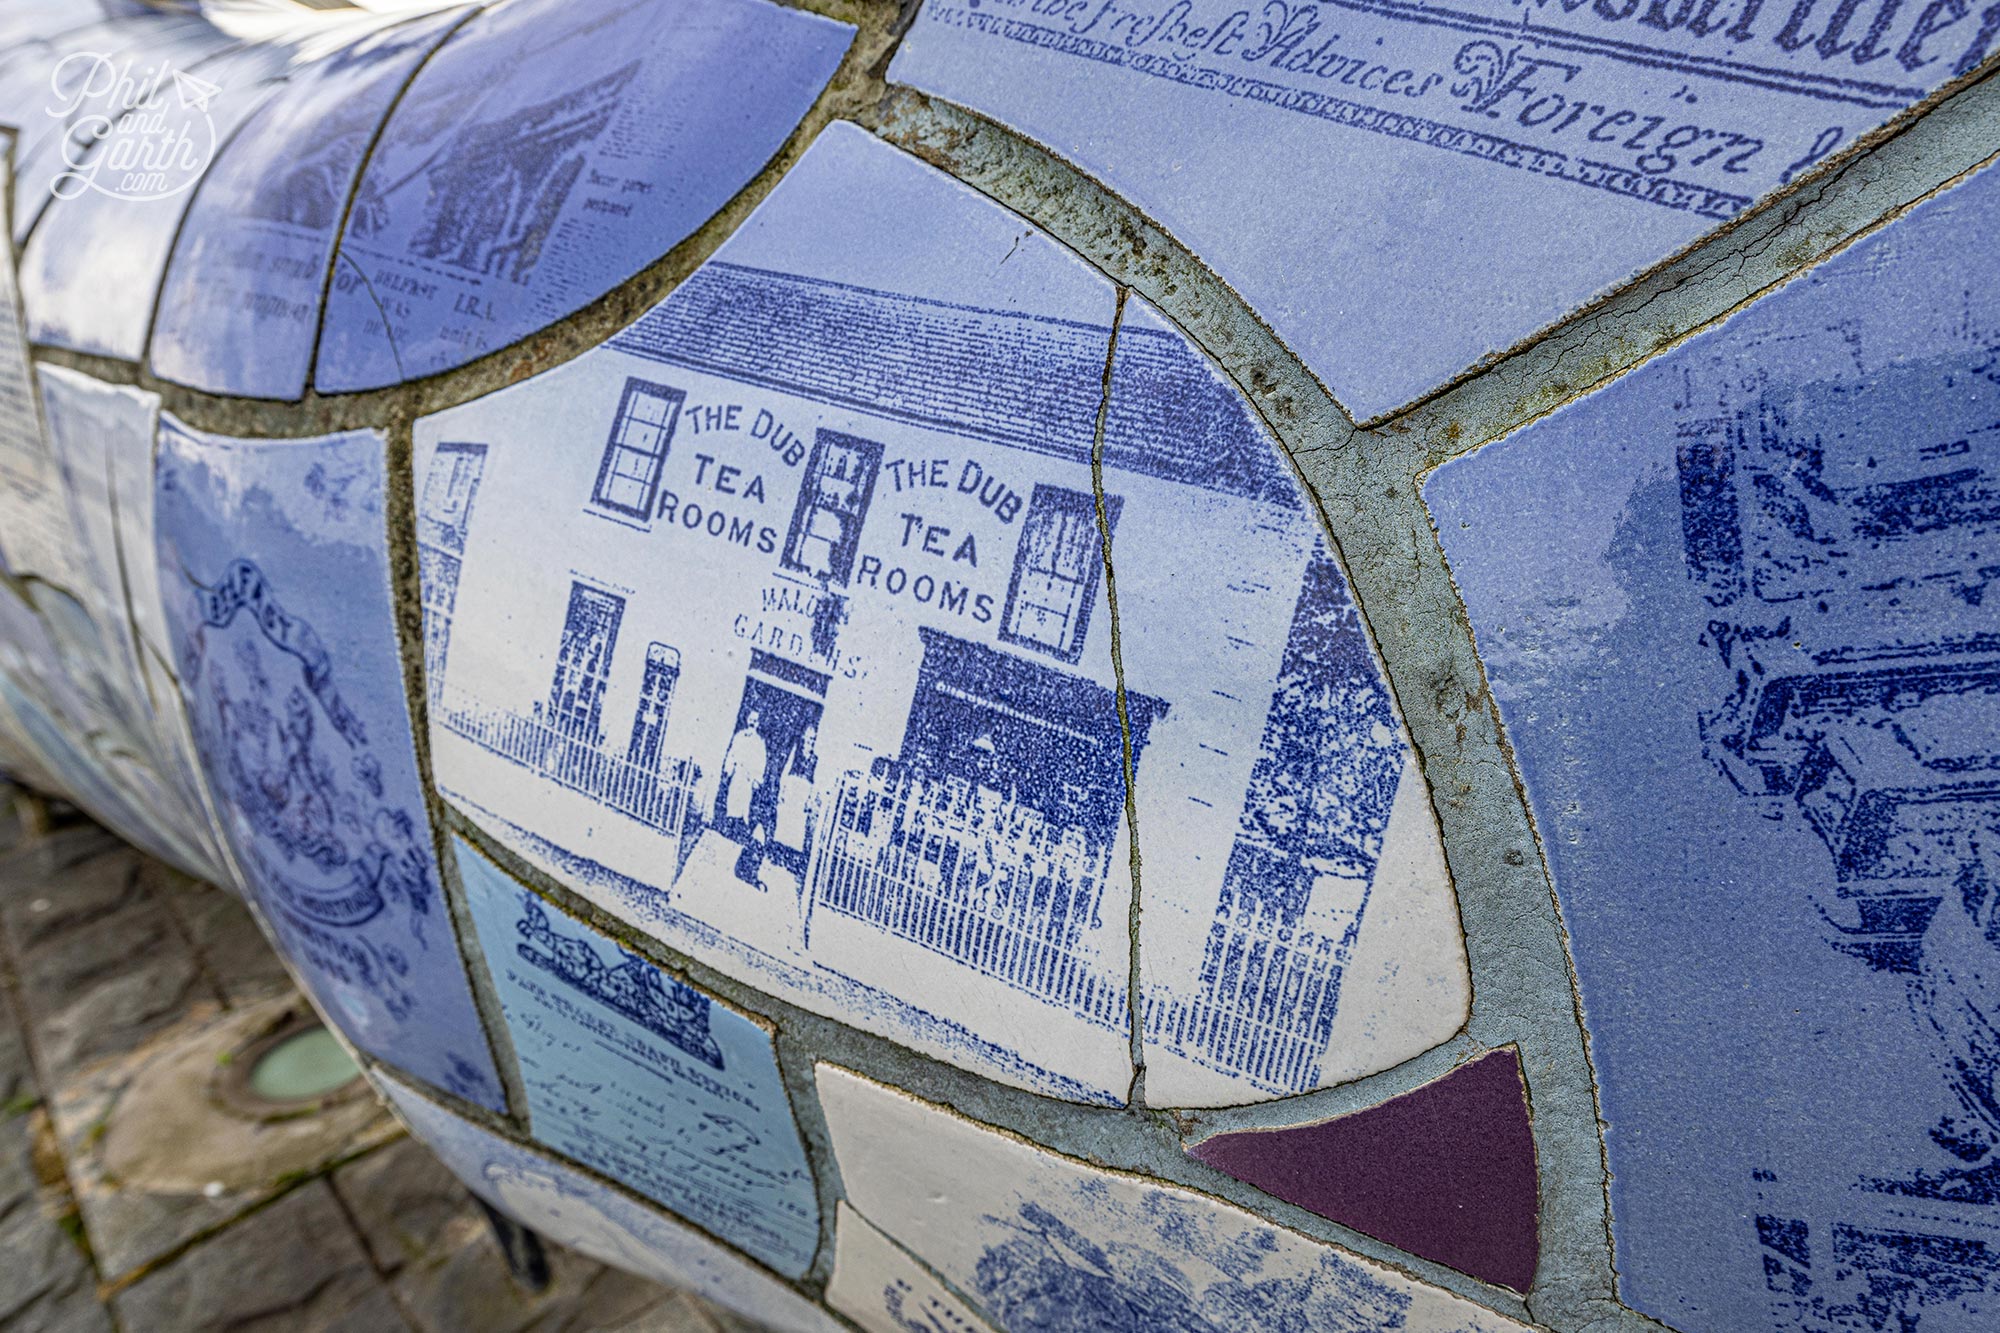 The tiles show images and text of Belfast's history